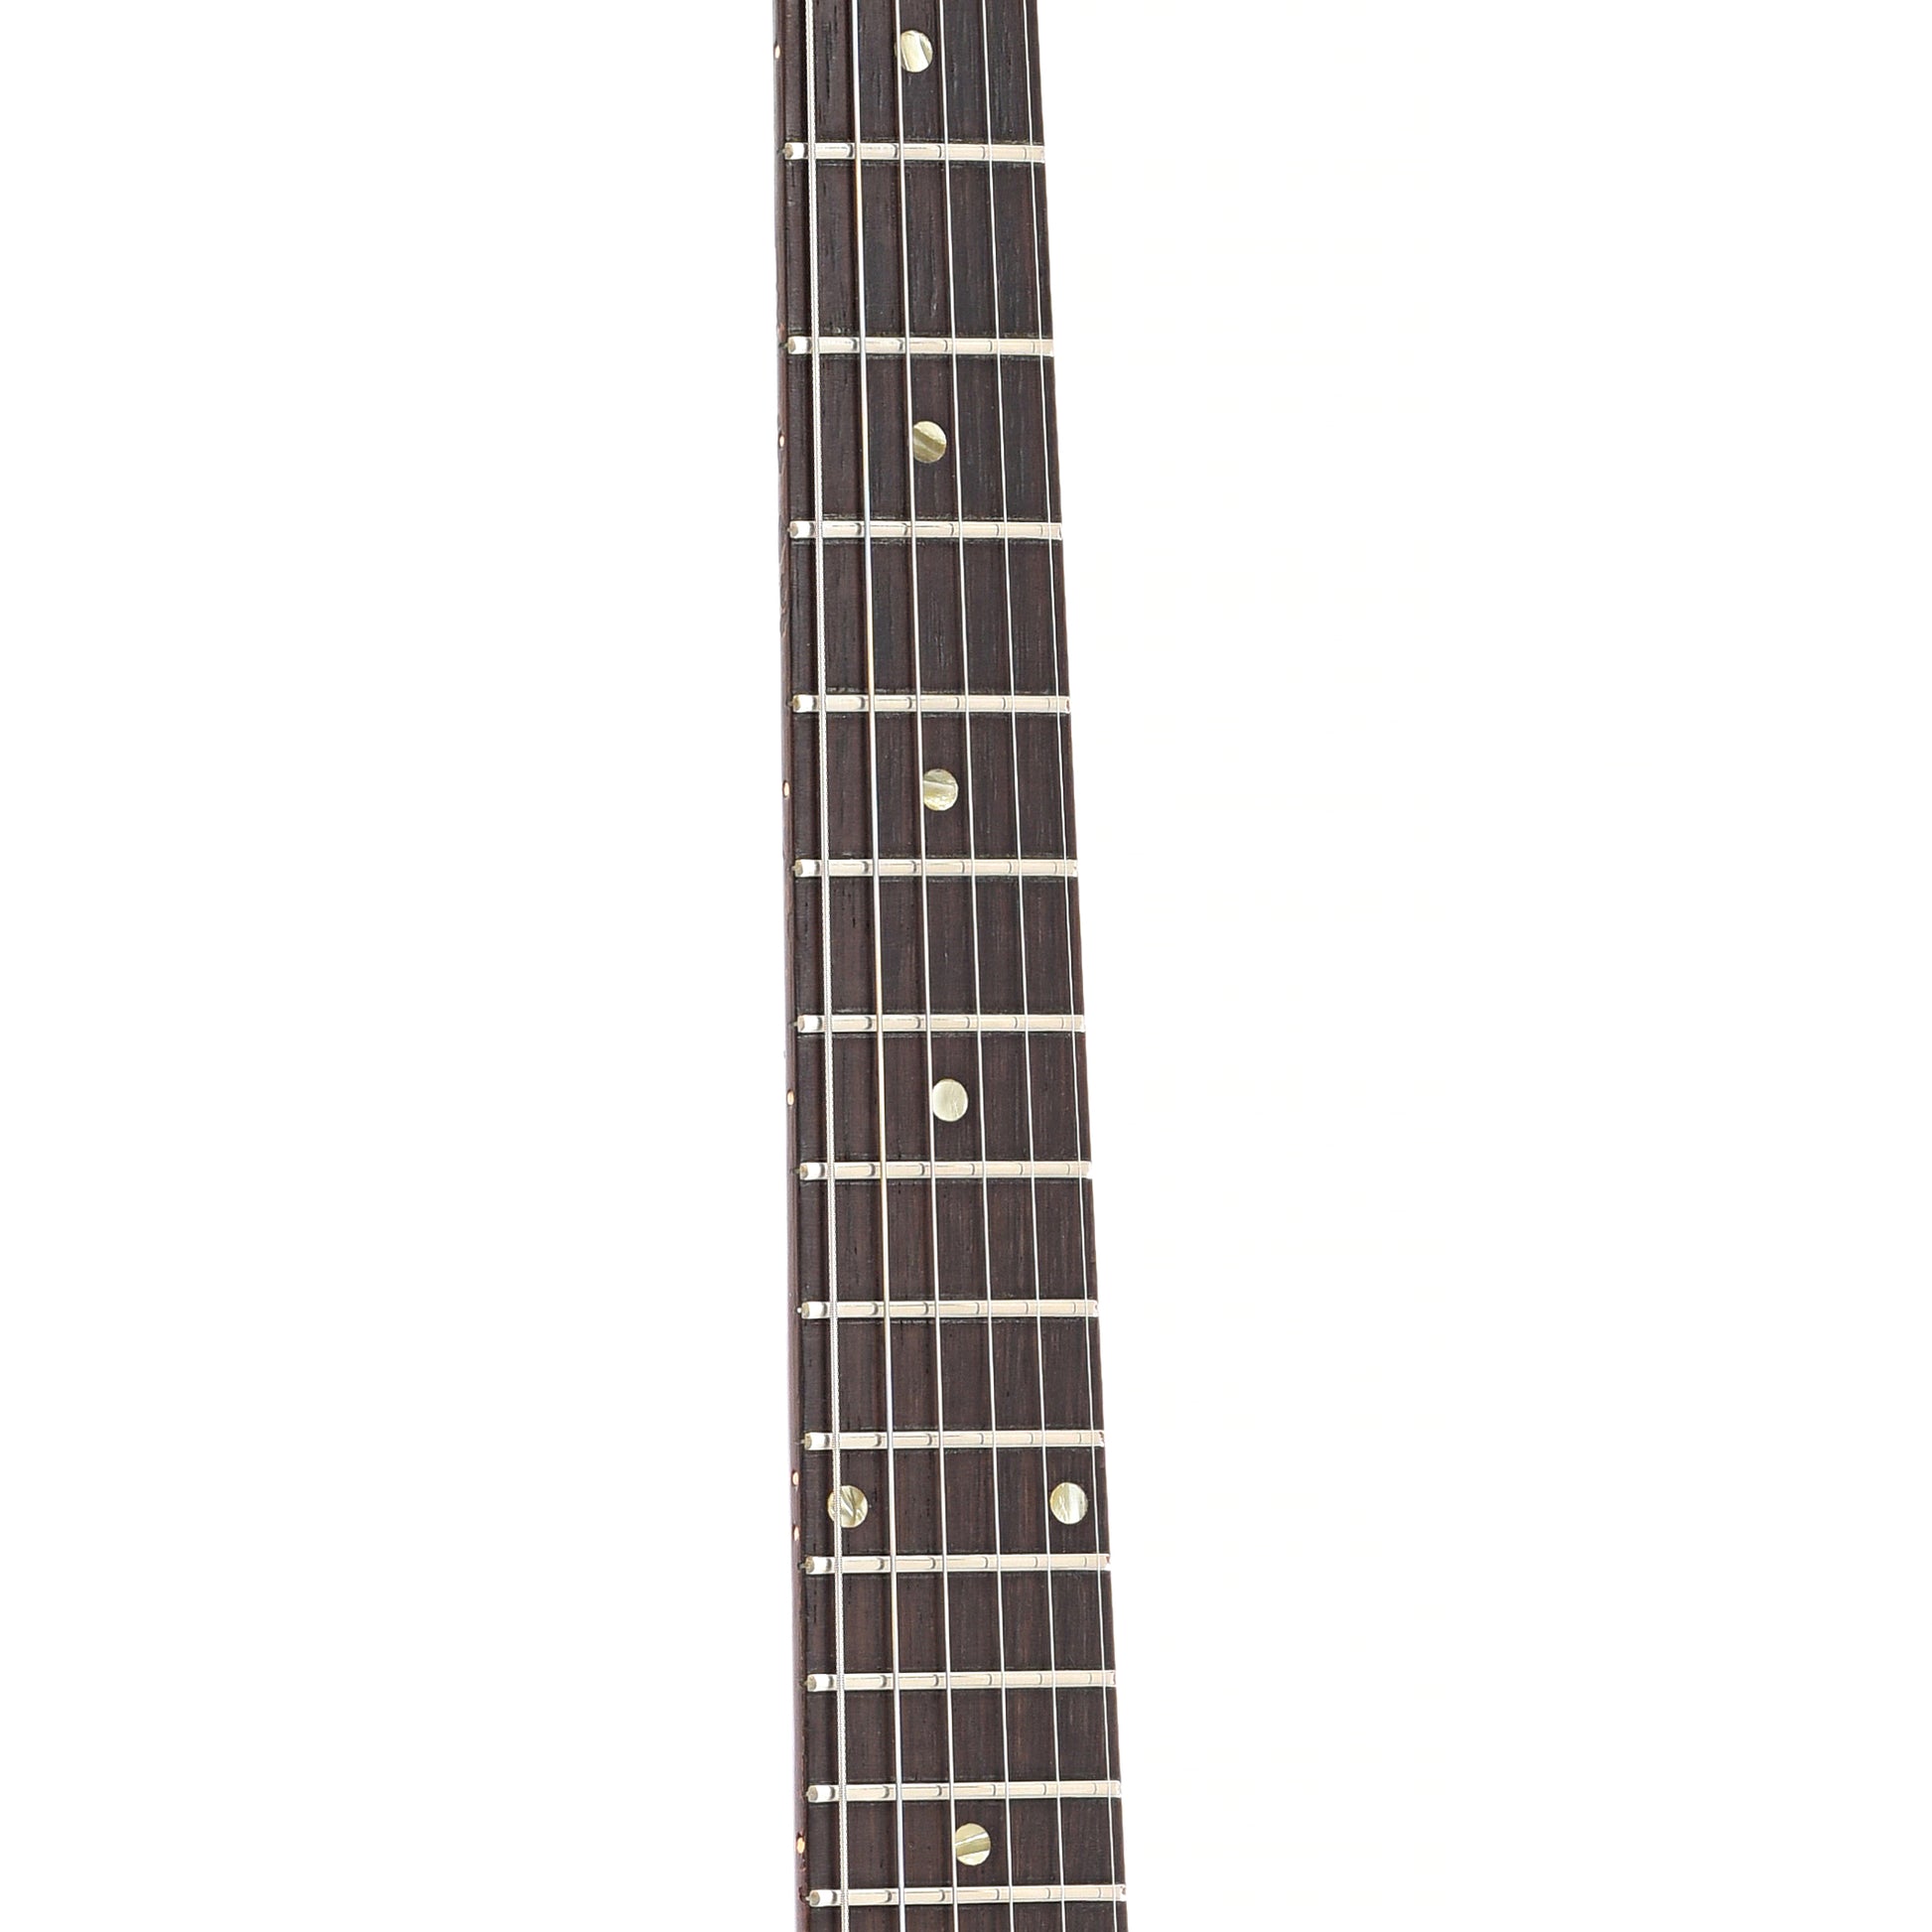 Fretboard of Epiphone Wilshire Electric Guitar (1964)